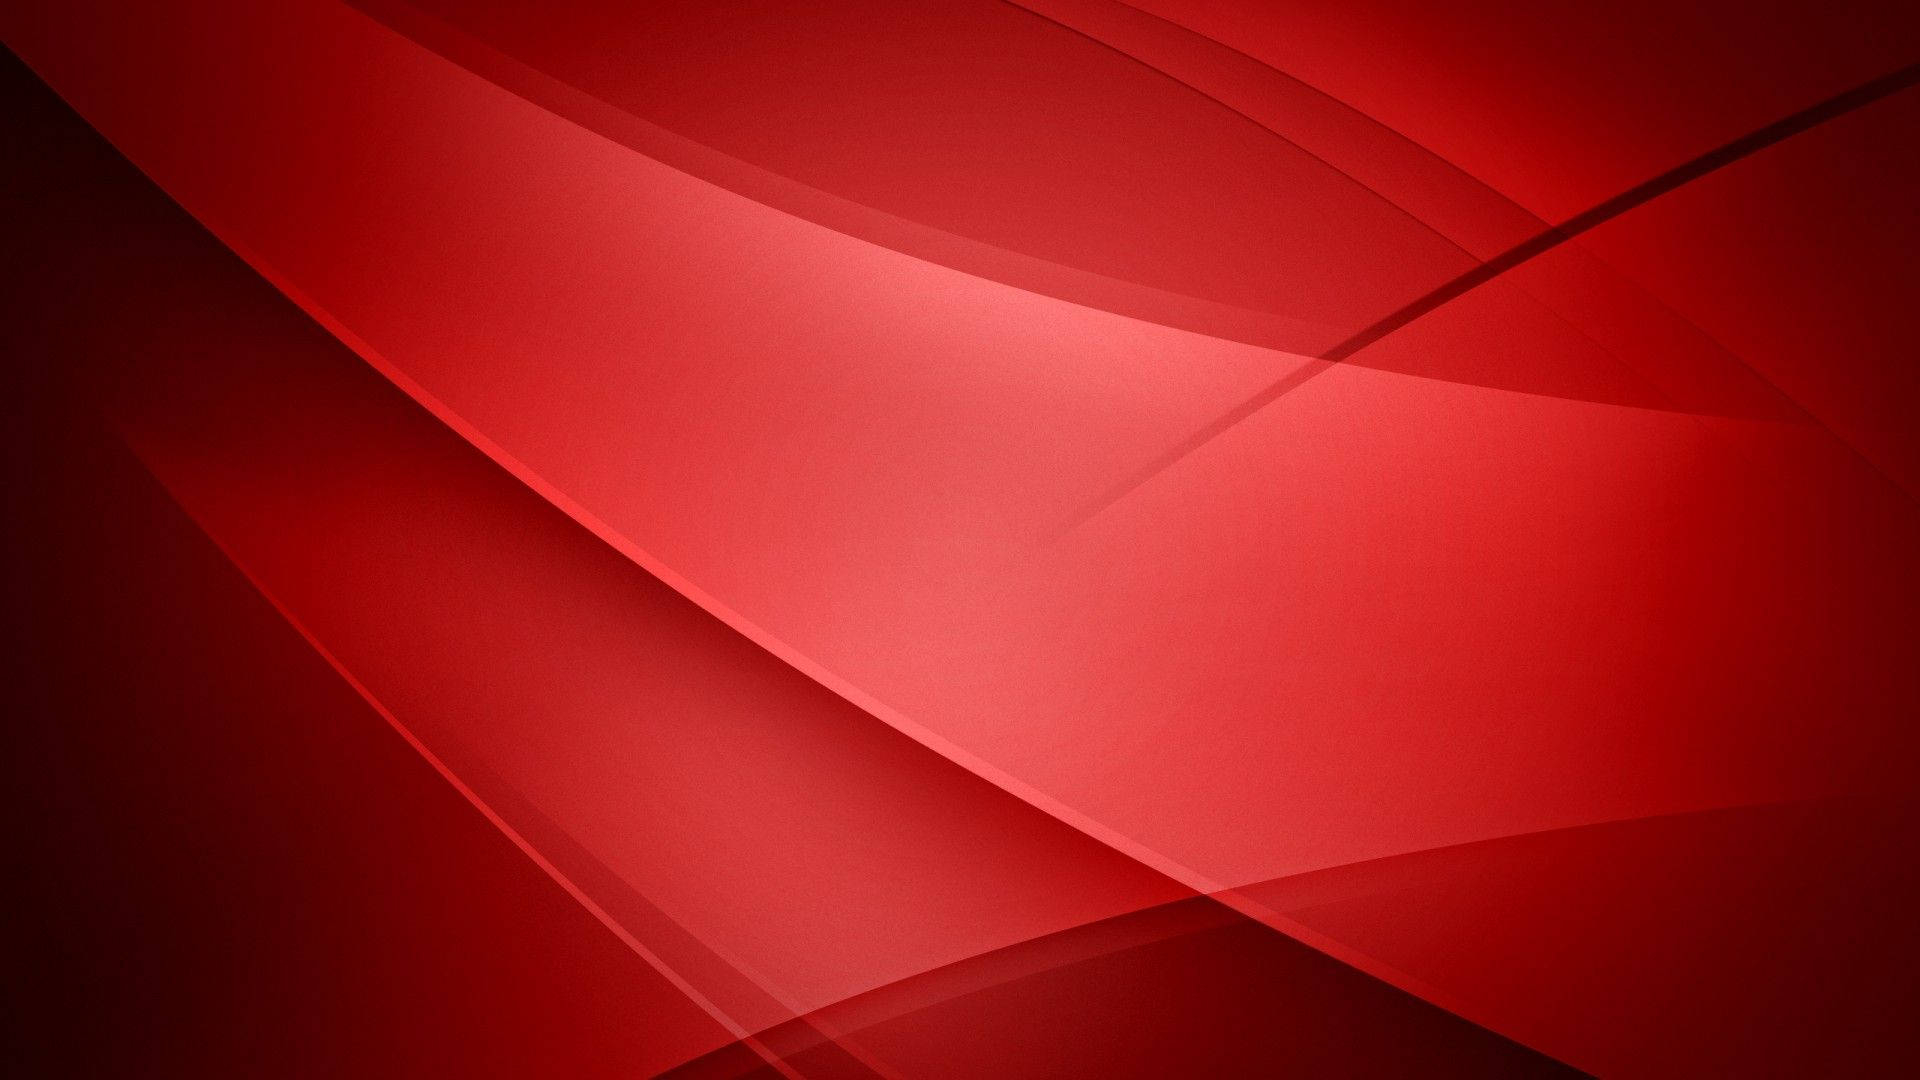 1920x1080 Download Red Background Light Reflection Wallpaper